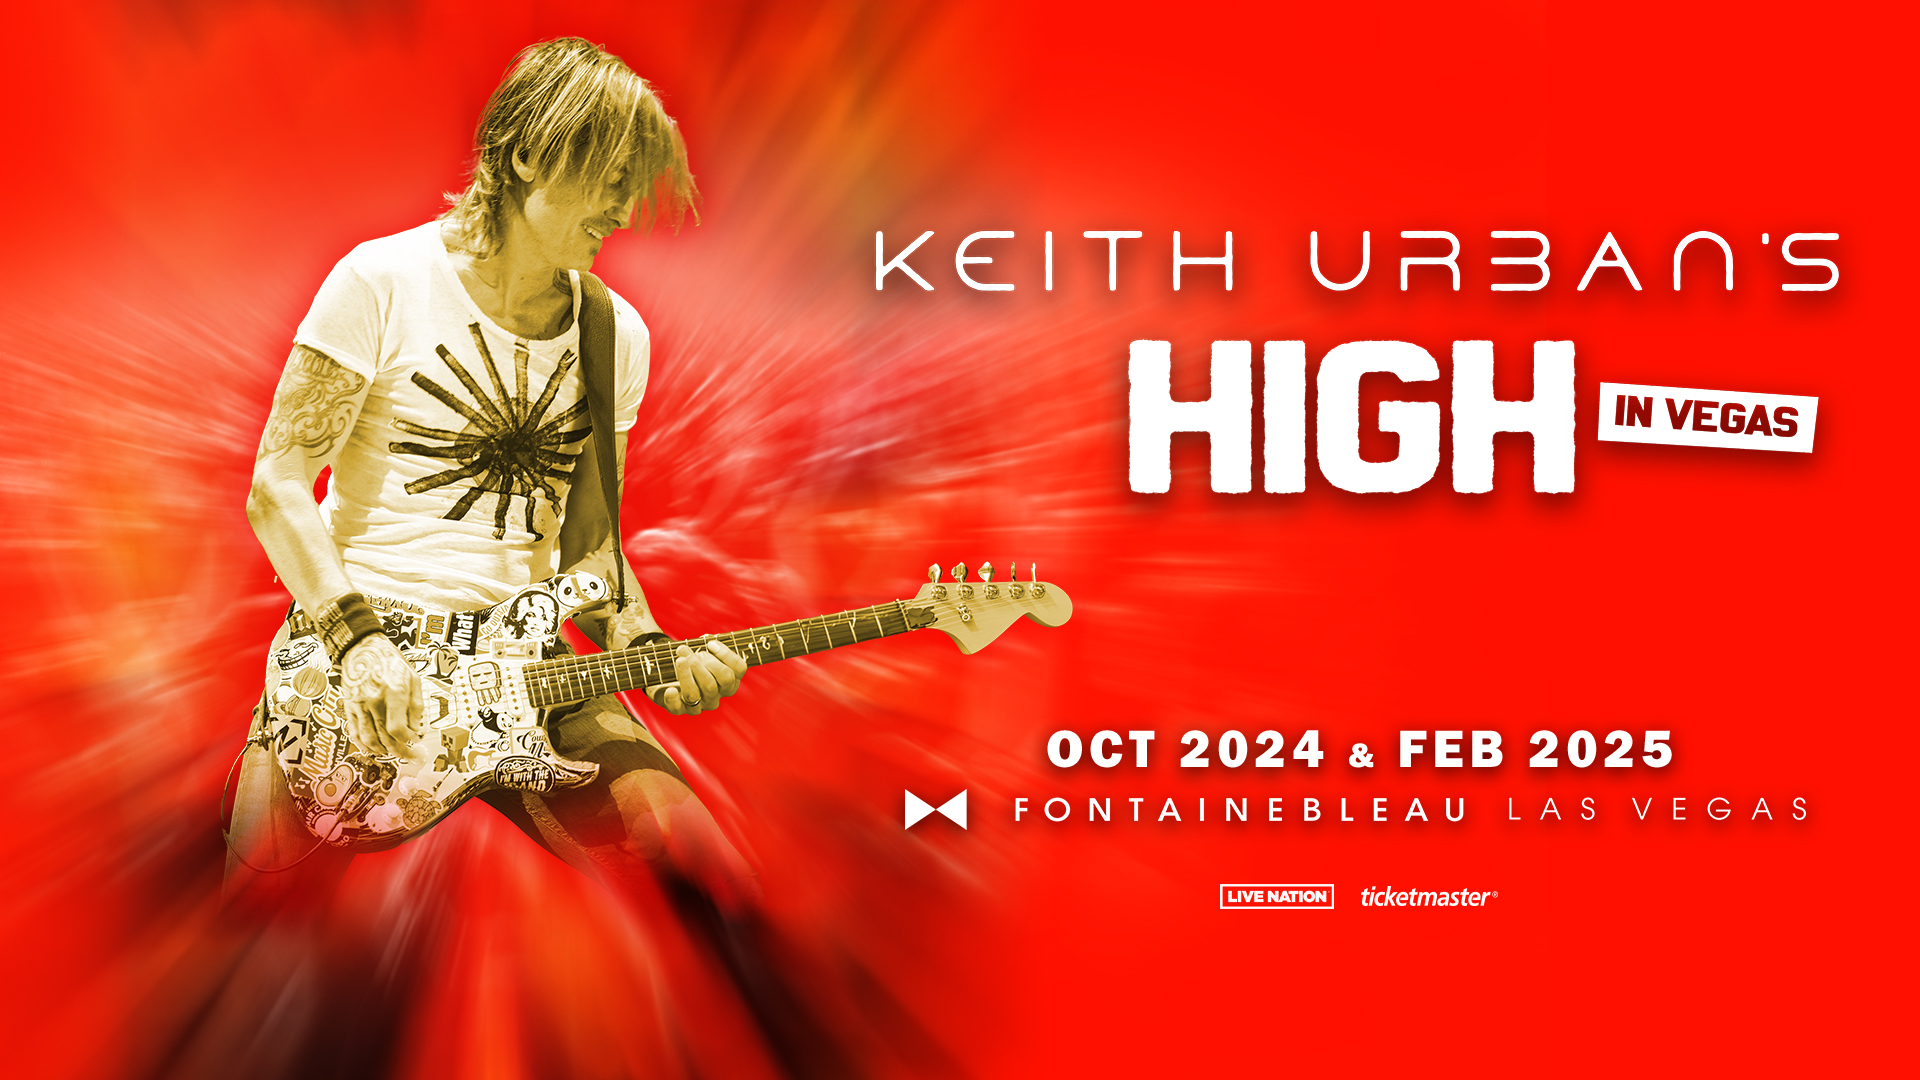 Get Presale Tickets to Keith Urban's HIGH in Vegas Shows